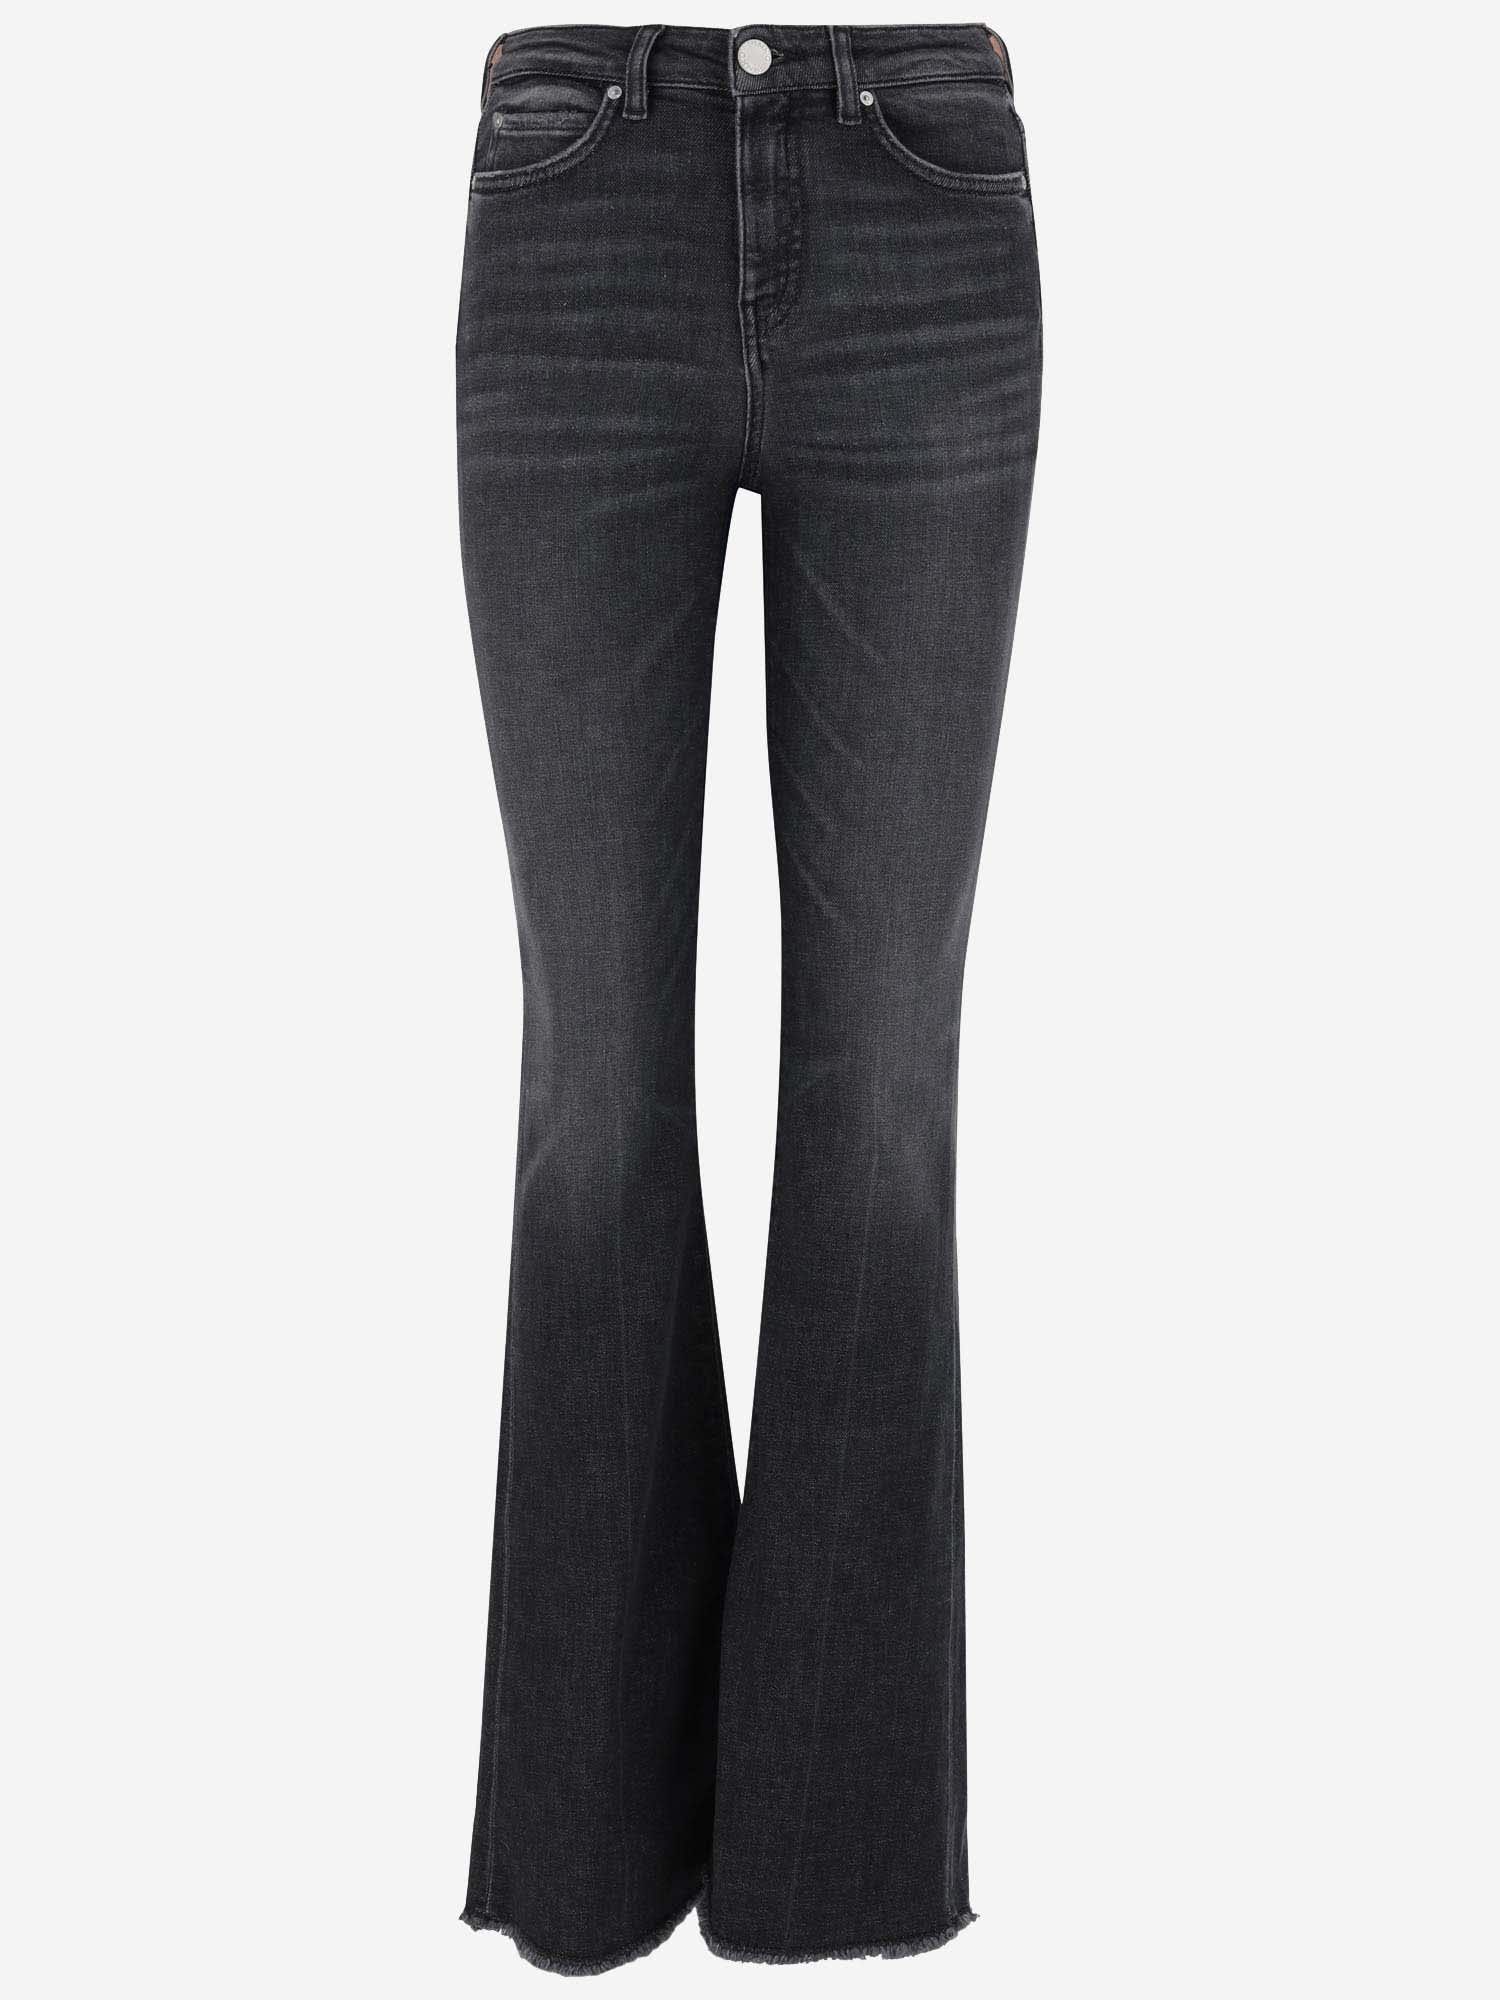 Stratch Cotton Blend Flared Jeans